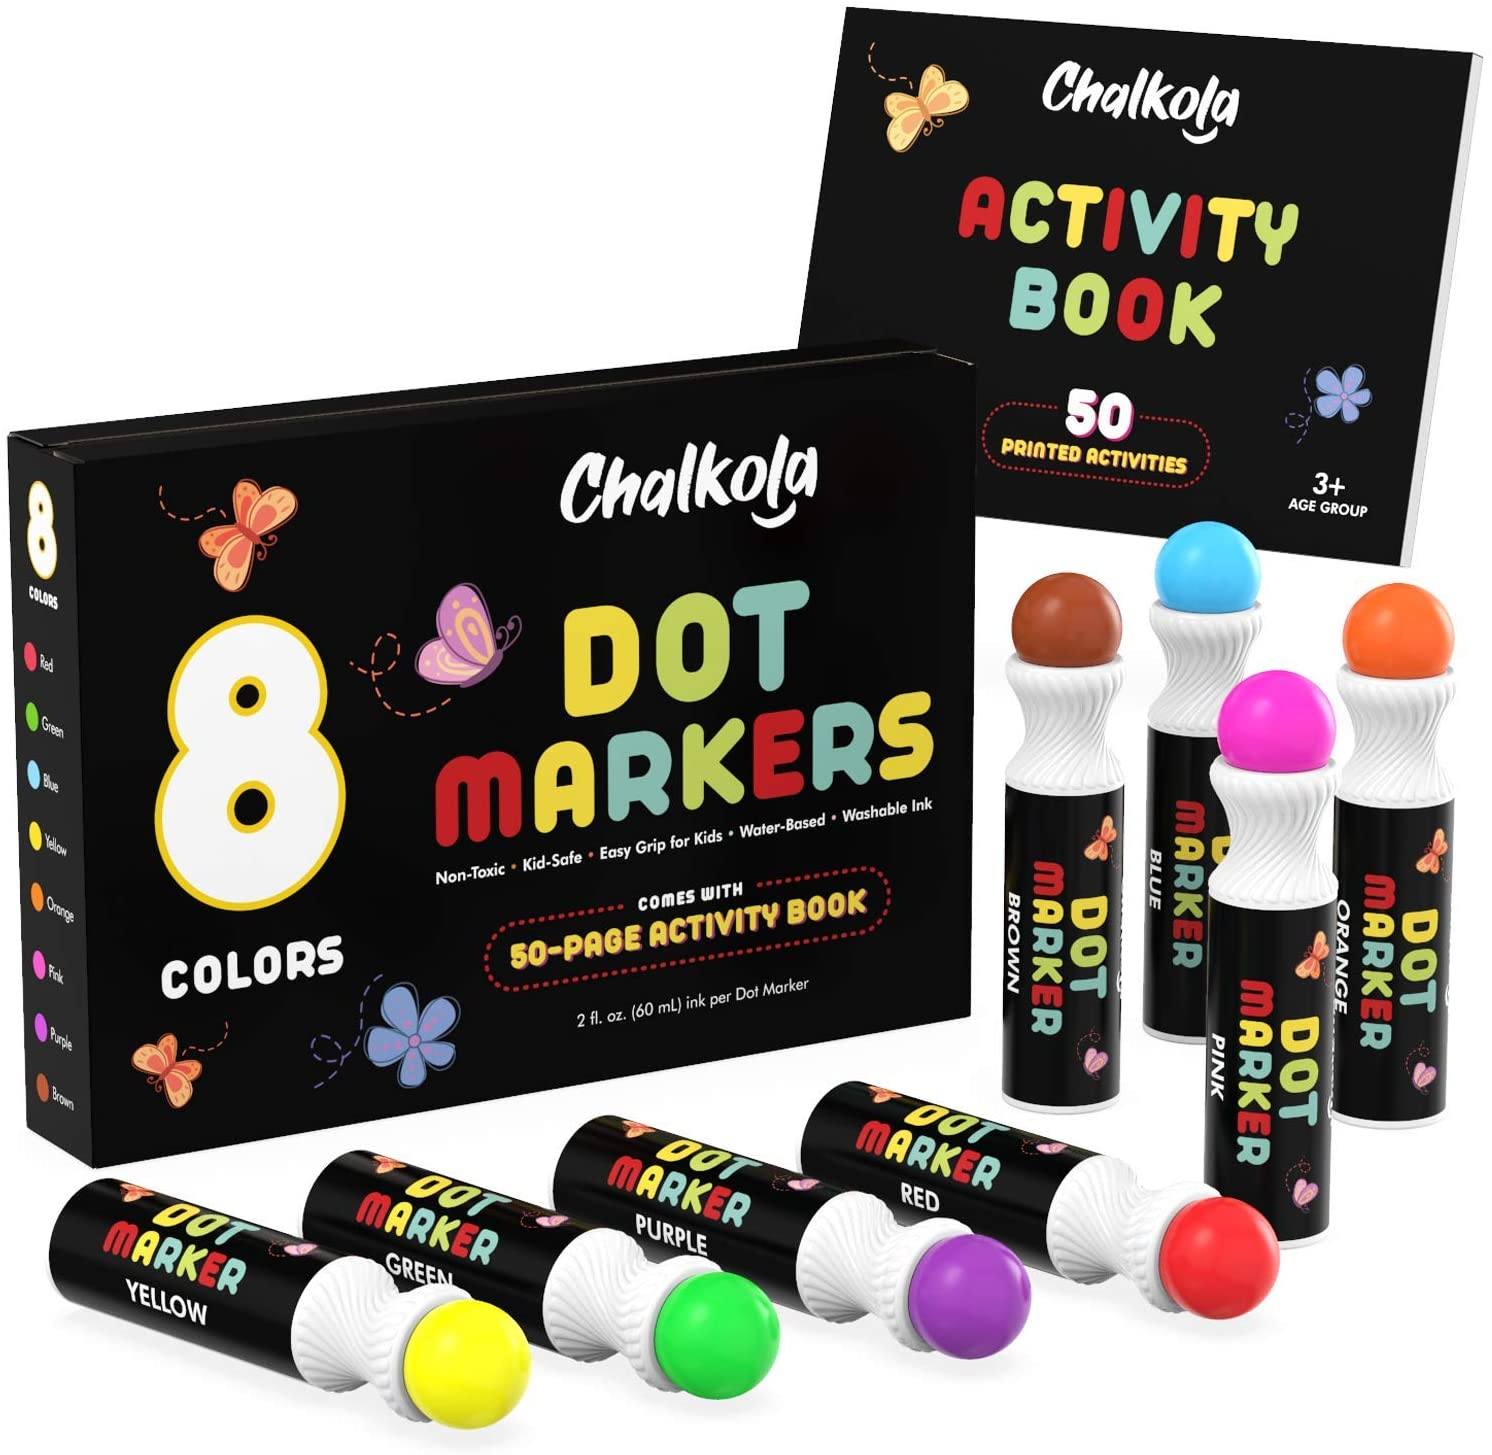  Mr. Pen- Washable Dot Markers for Toddlers and Kids,8